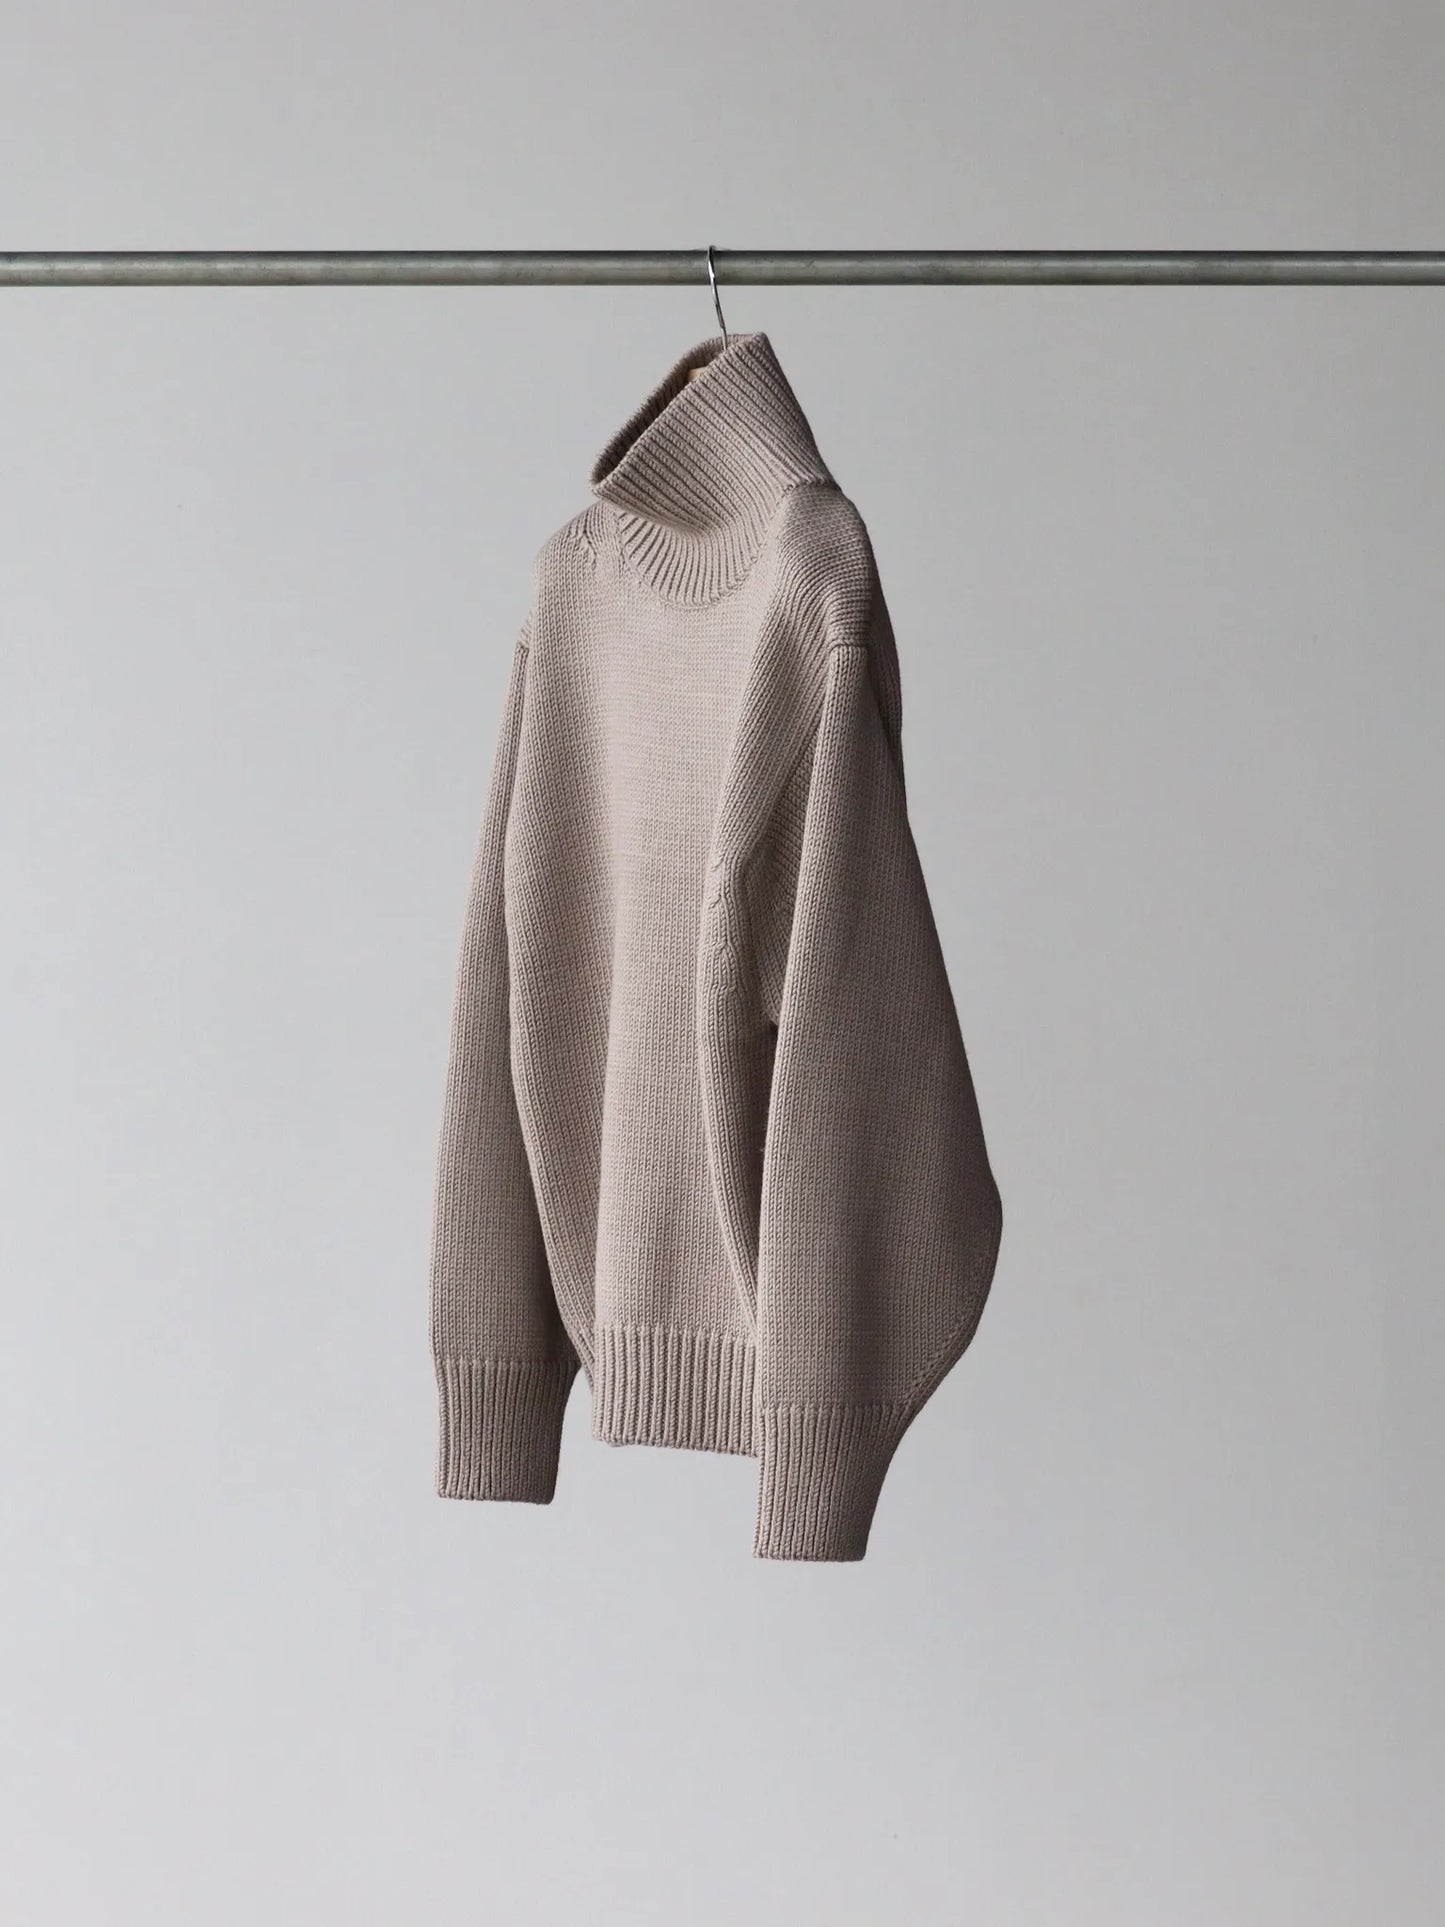 olde-h-daughter-wool-turtle-neck-p-o-duskee-3